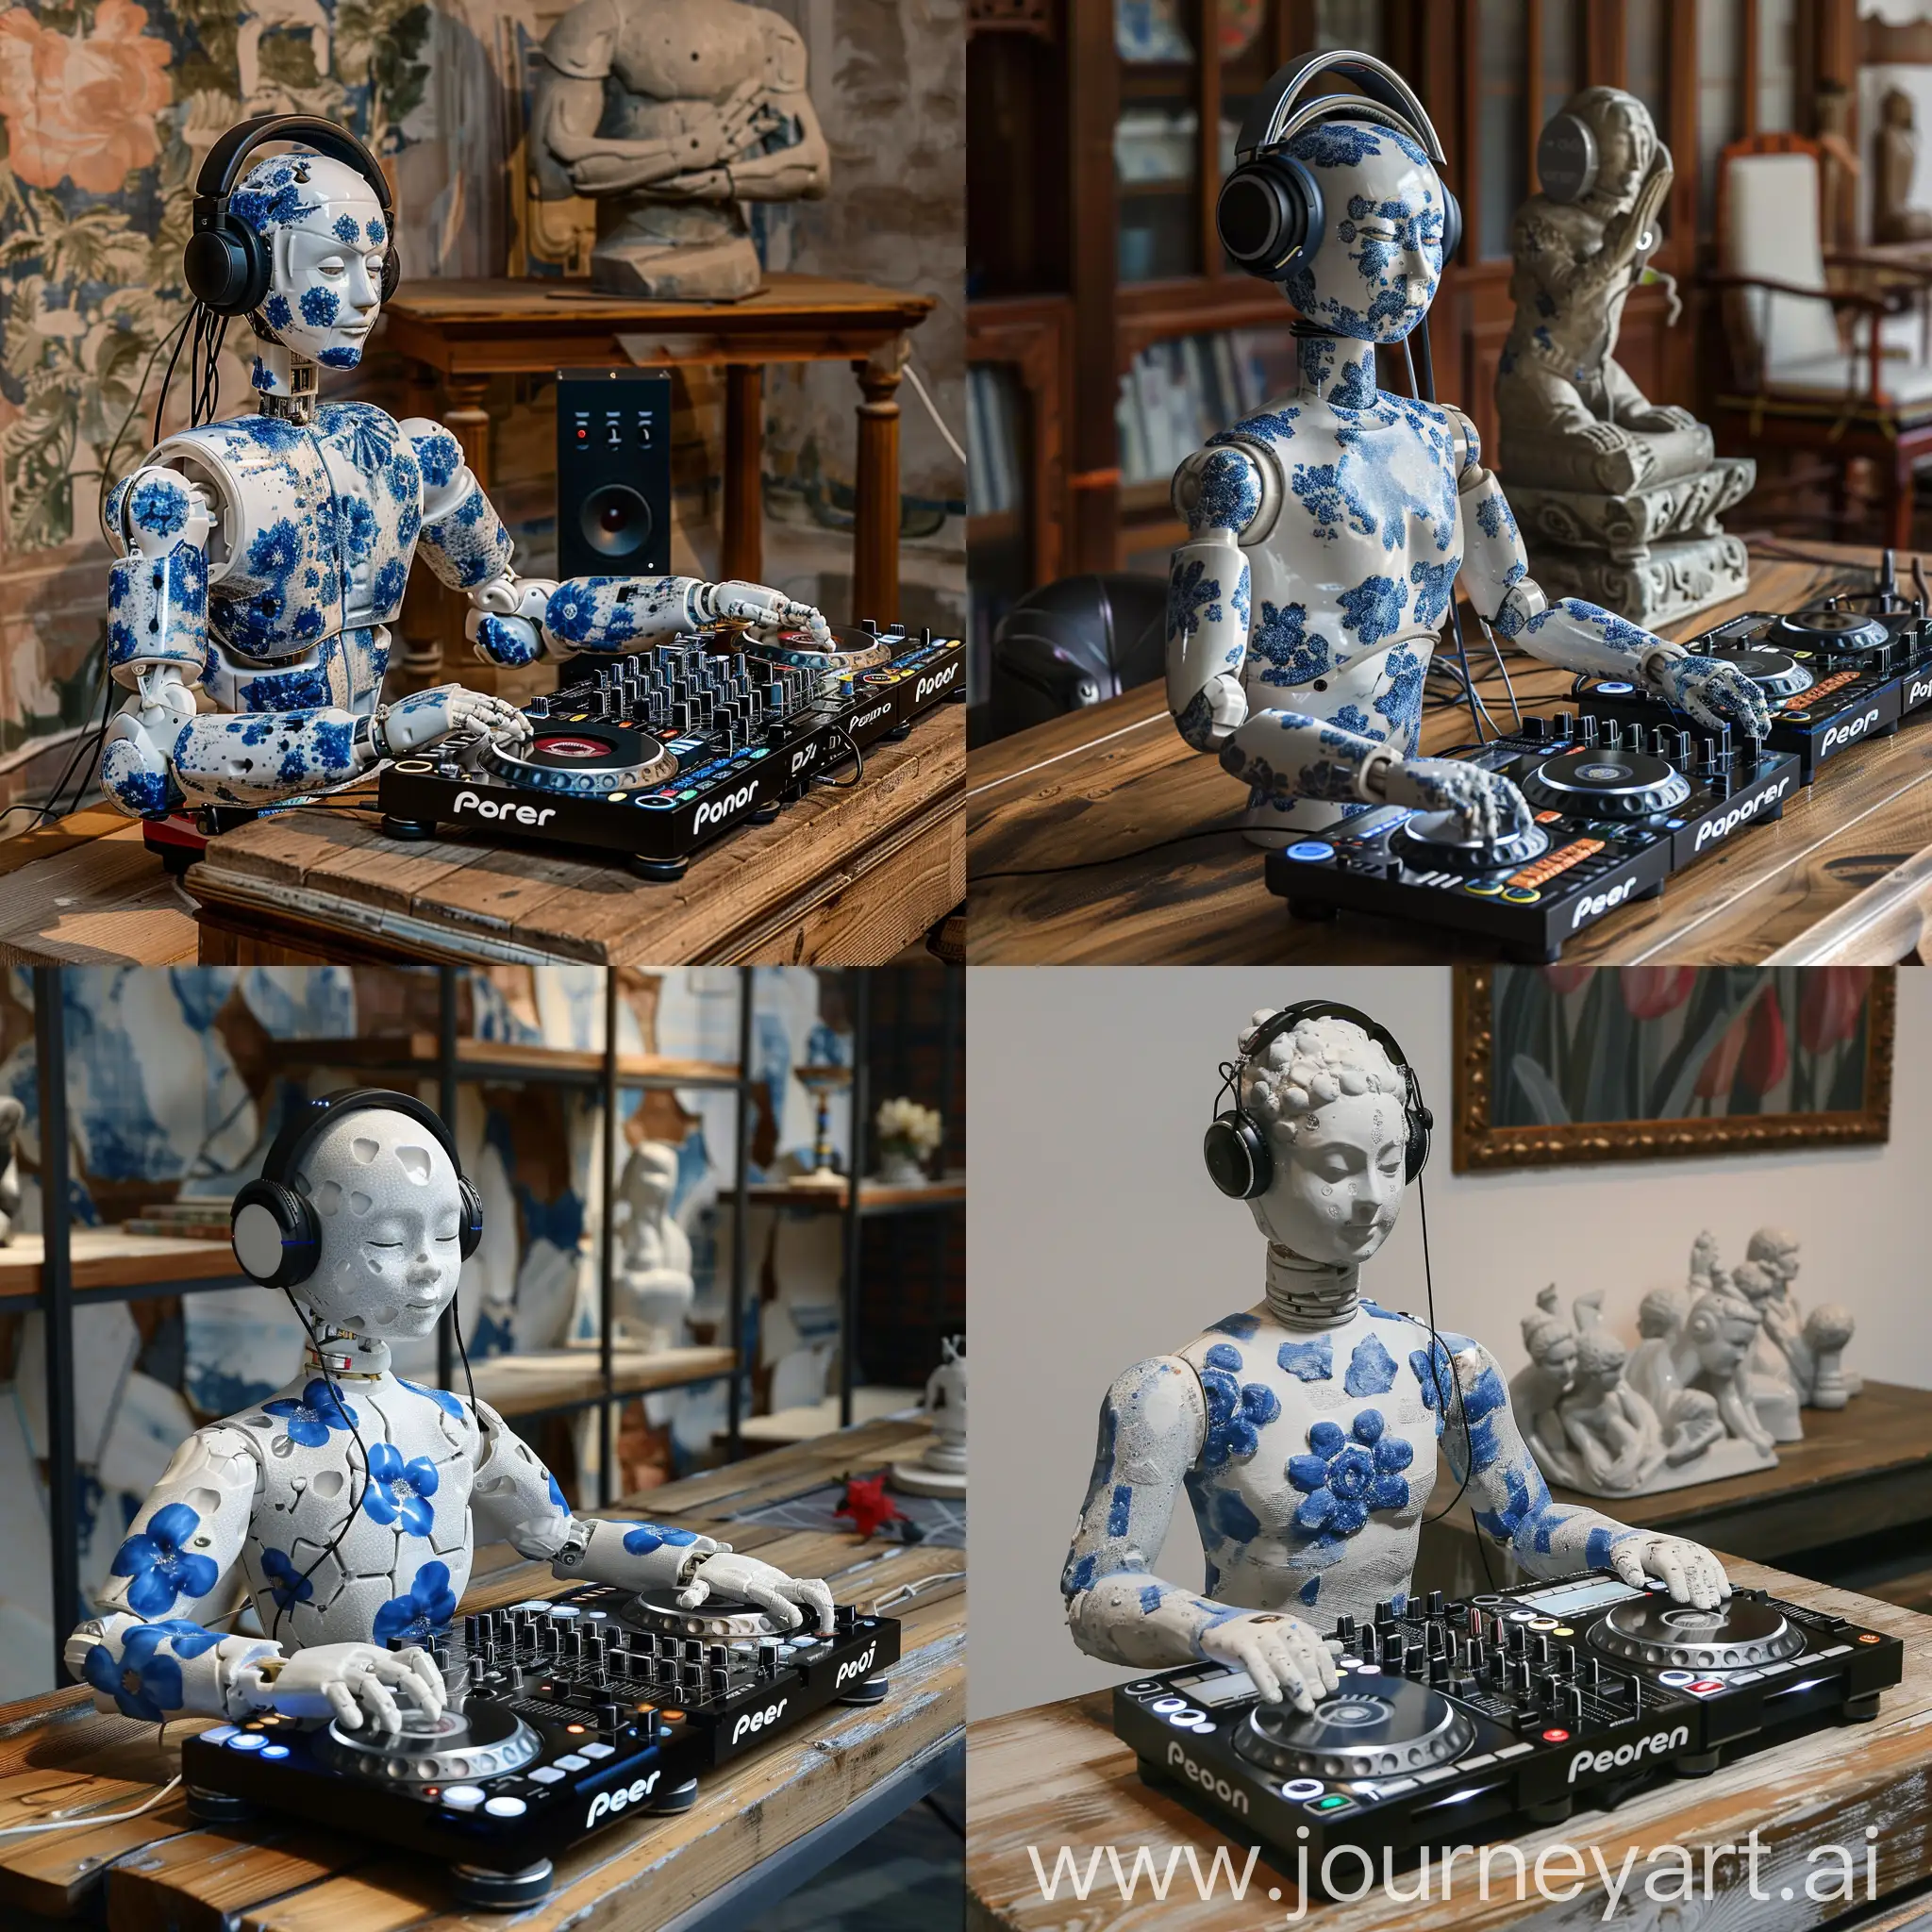 DJ-Humanoid-Robot-Mixing-Music-in-Private-Room-with-Ceramic-Stone-Statue